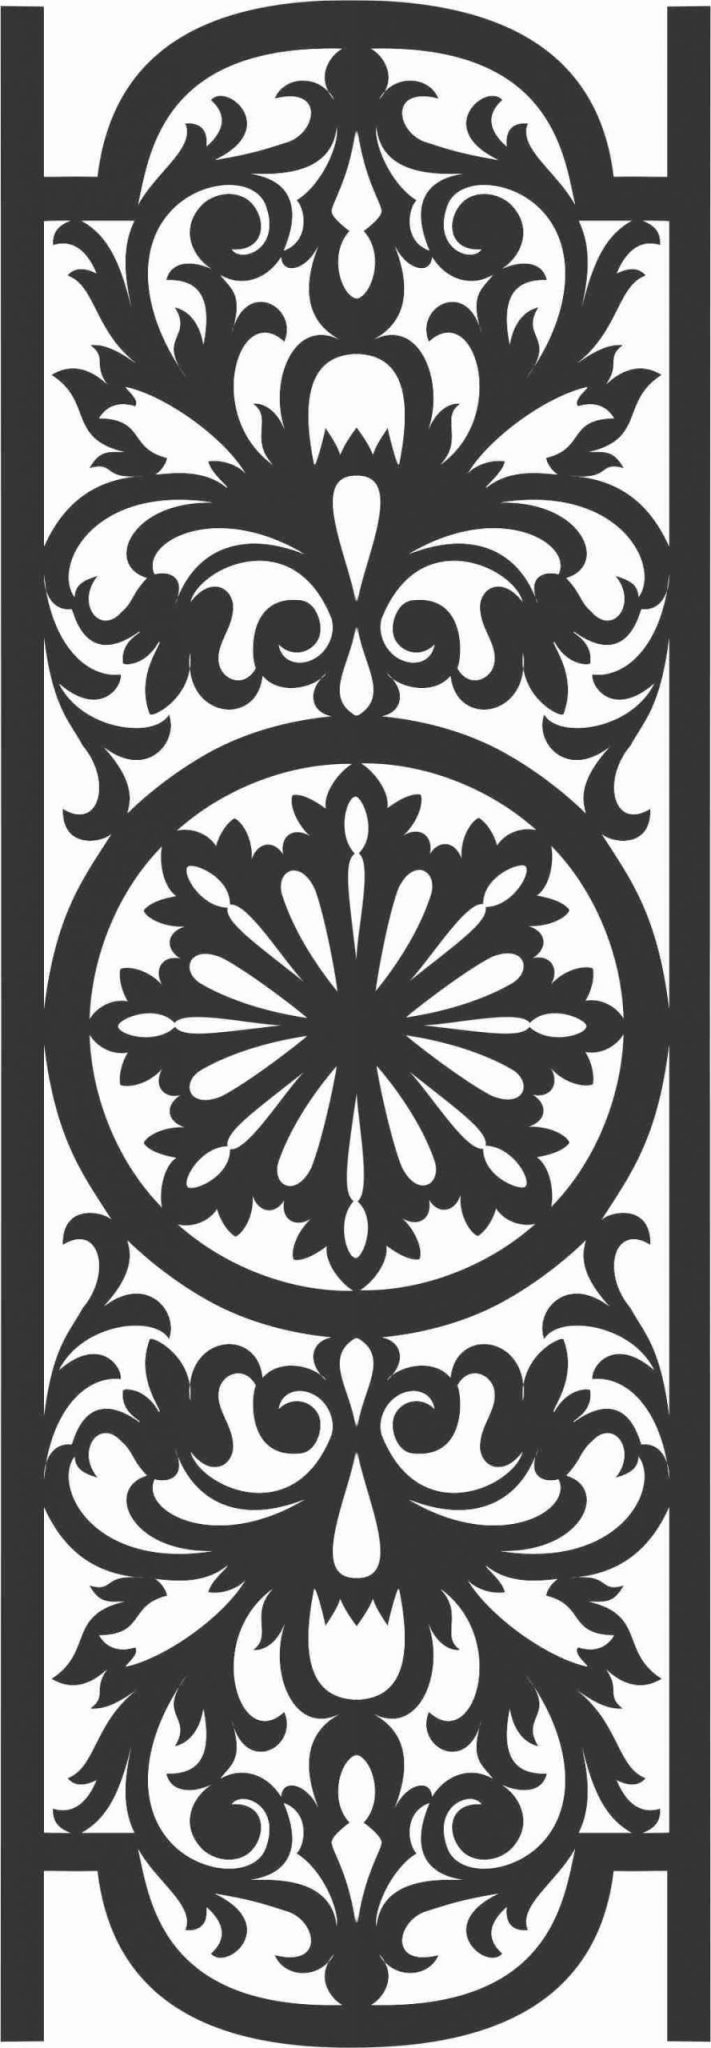 Decorative Screen Patterns For Laser Cutting 30 Free DXF File